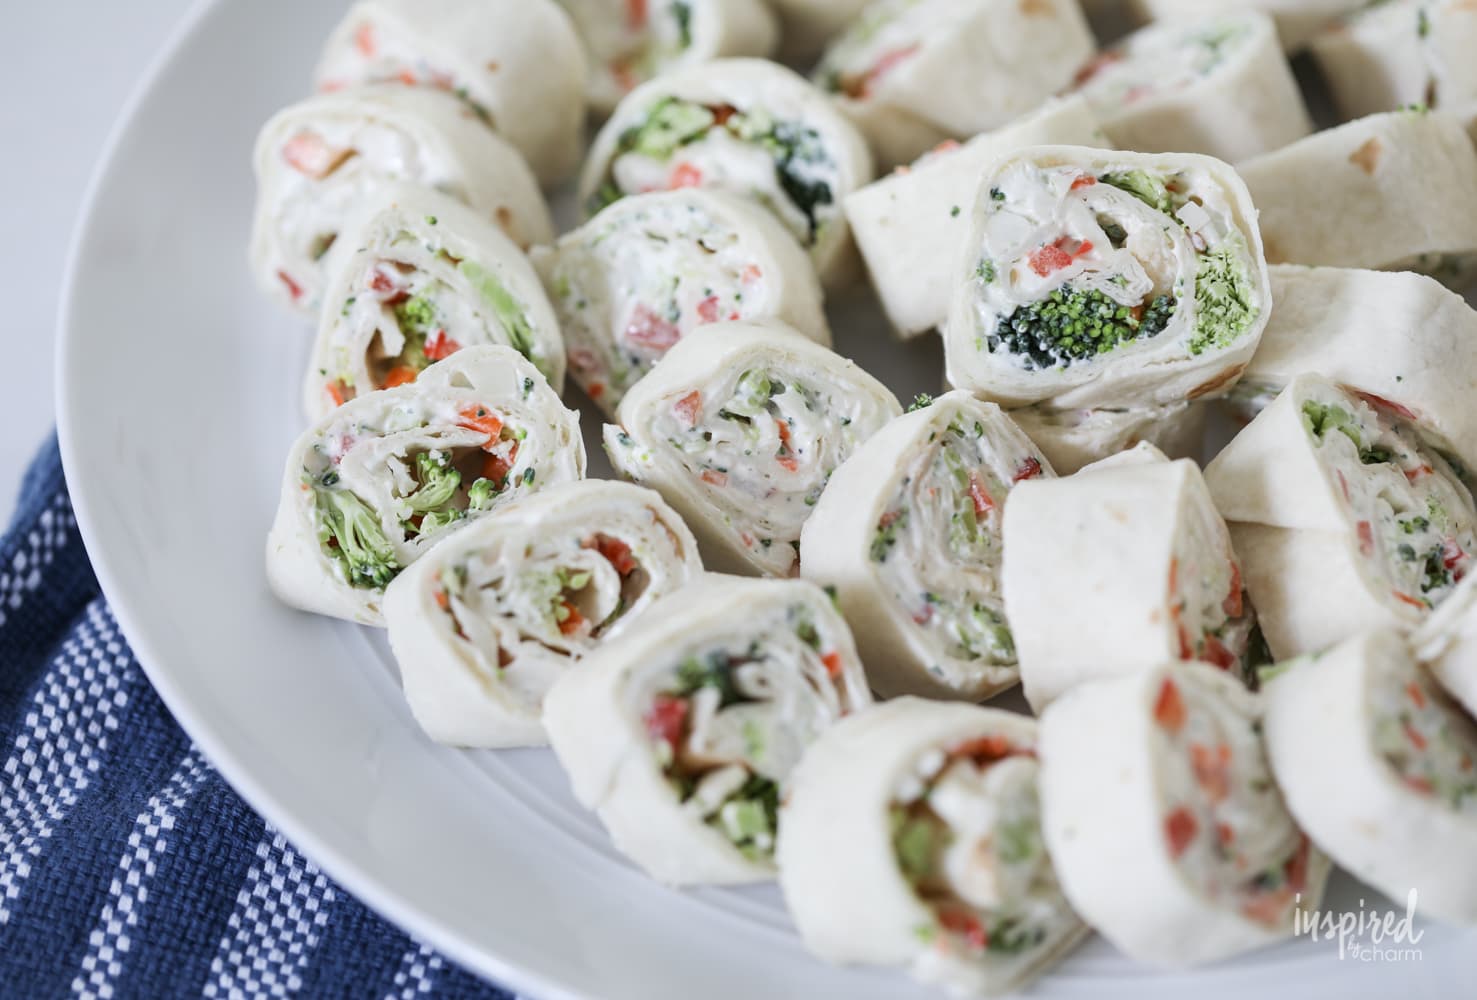 These Veggie Pizza Roll-Ups are a delicious an easy appetizer recipe! #veggiepizza #roll-ups #pinwheels #rollup #snack #ranch